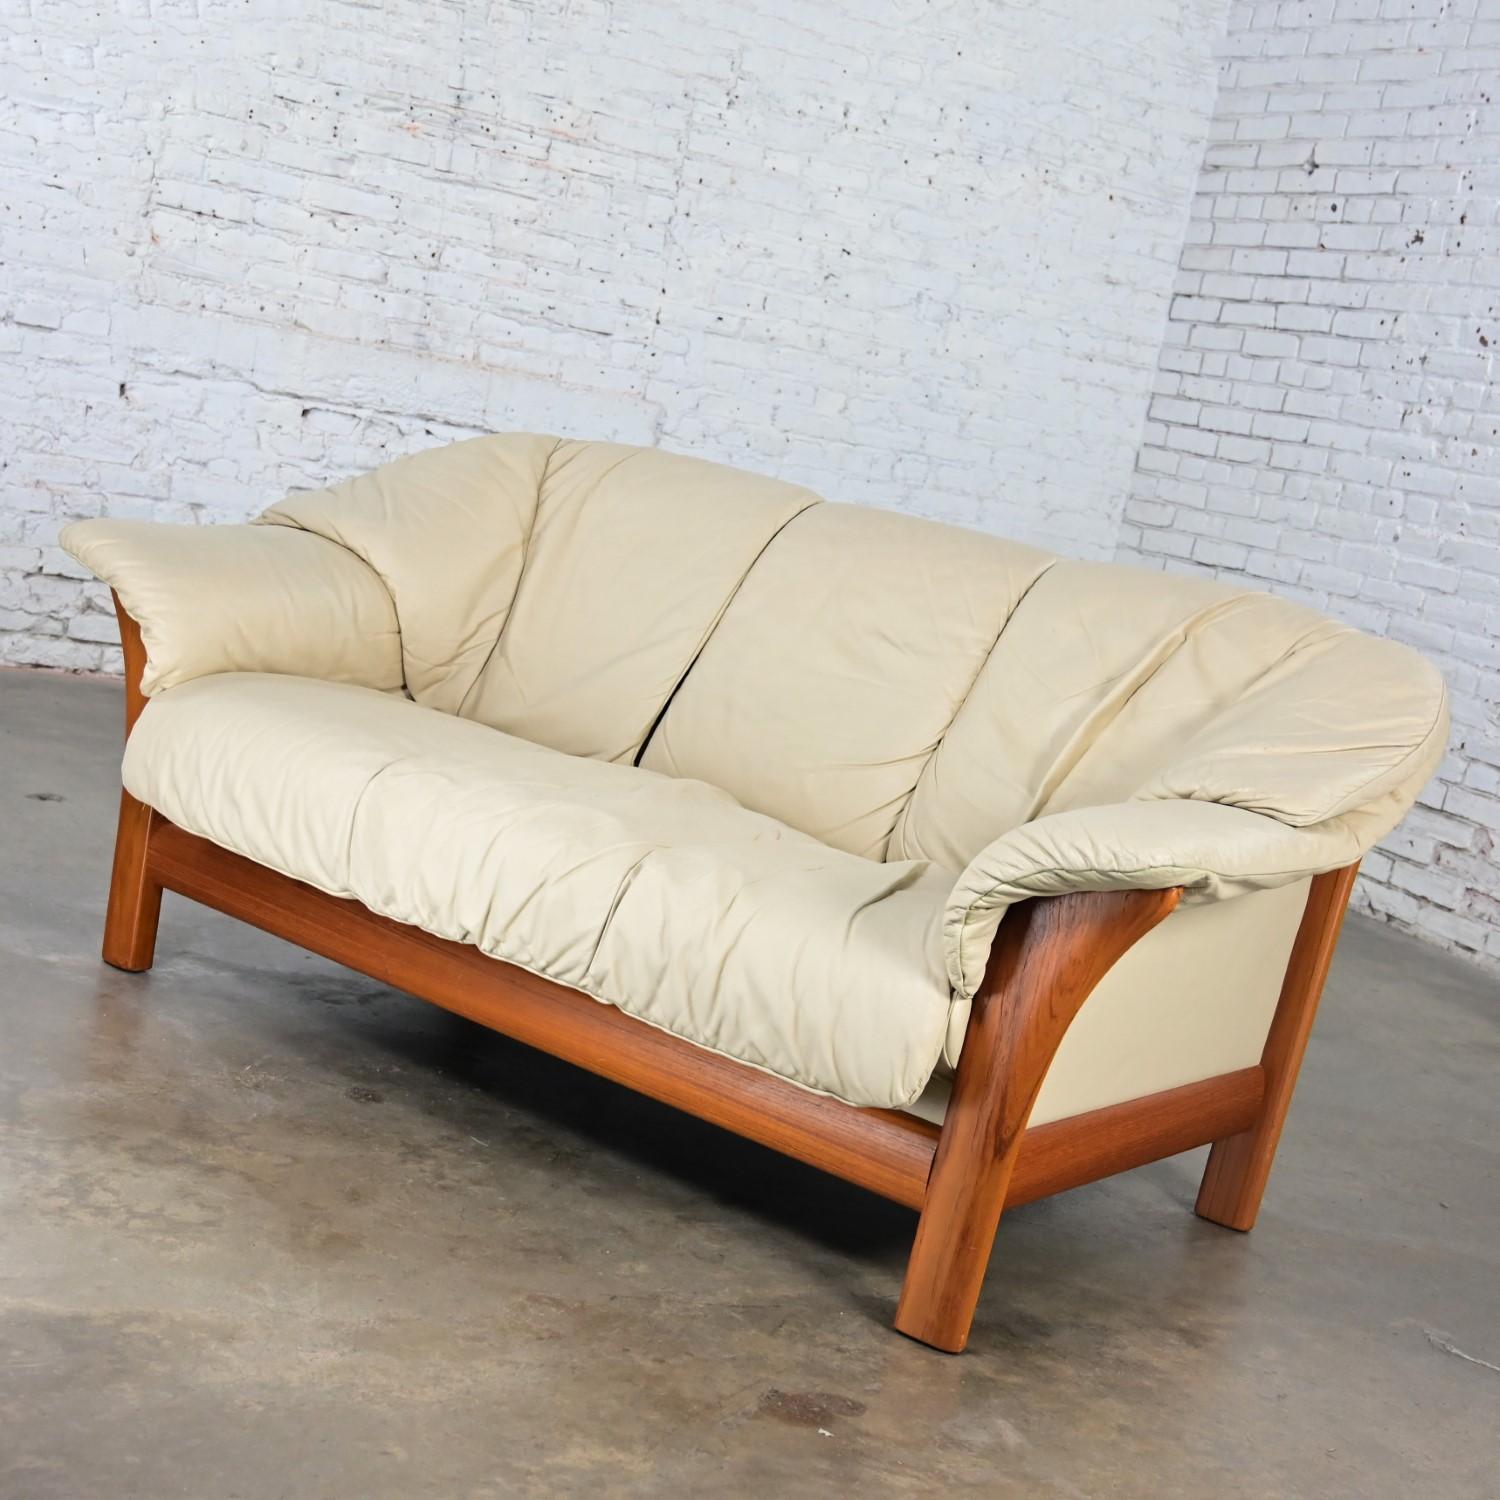 Scandinavian Modern Teak & Off White Leather Small Sofa Attributed to Ekornes For Sale 15